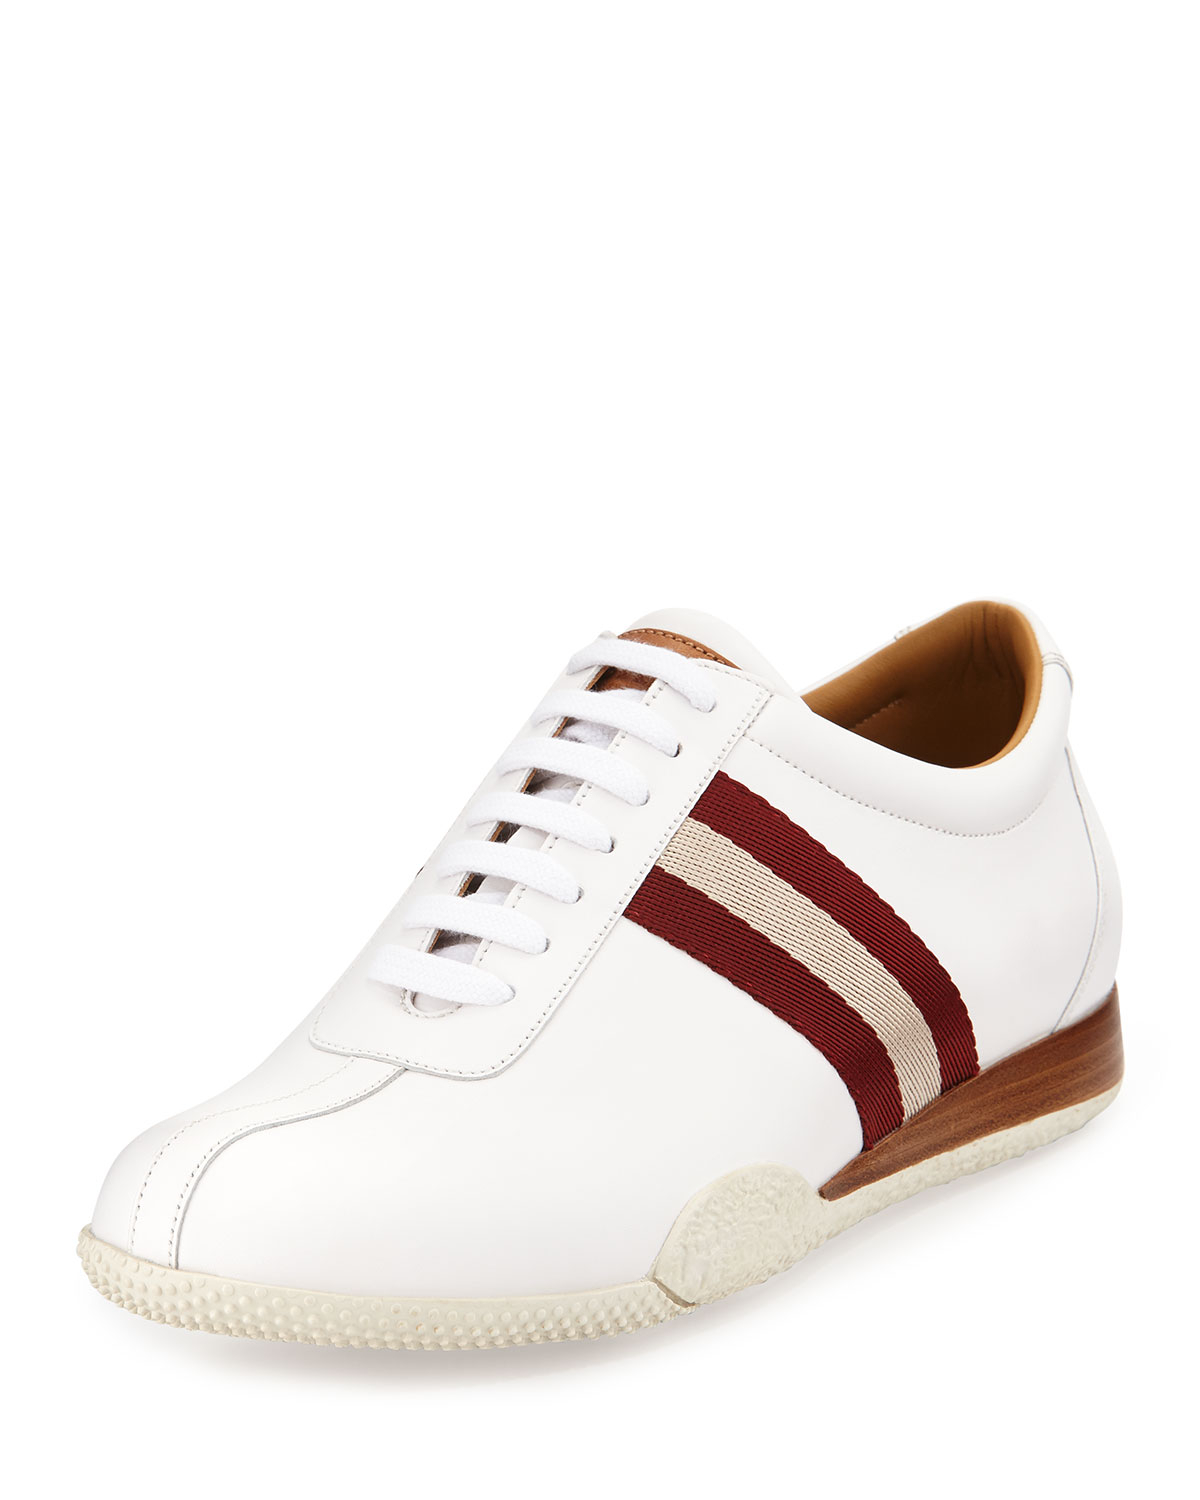 Bally Freenew Leather Sneakers in White for Men | Lyst